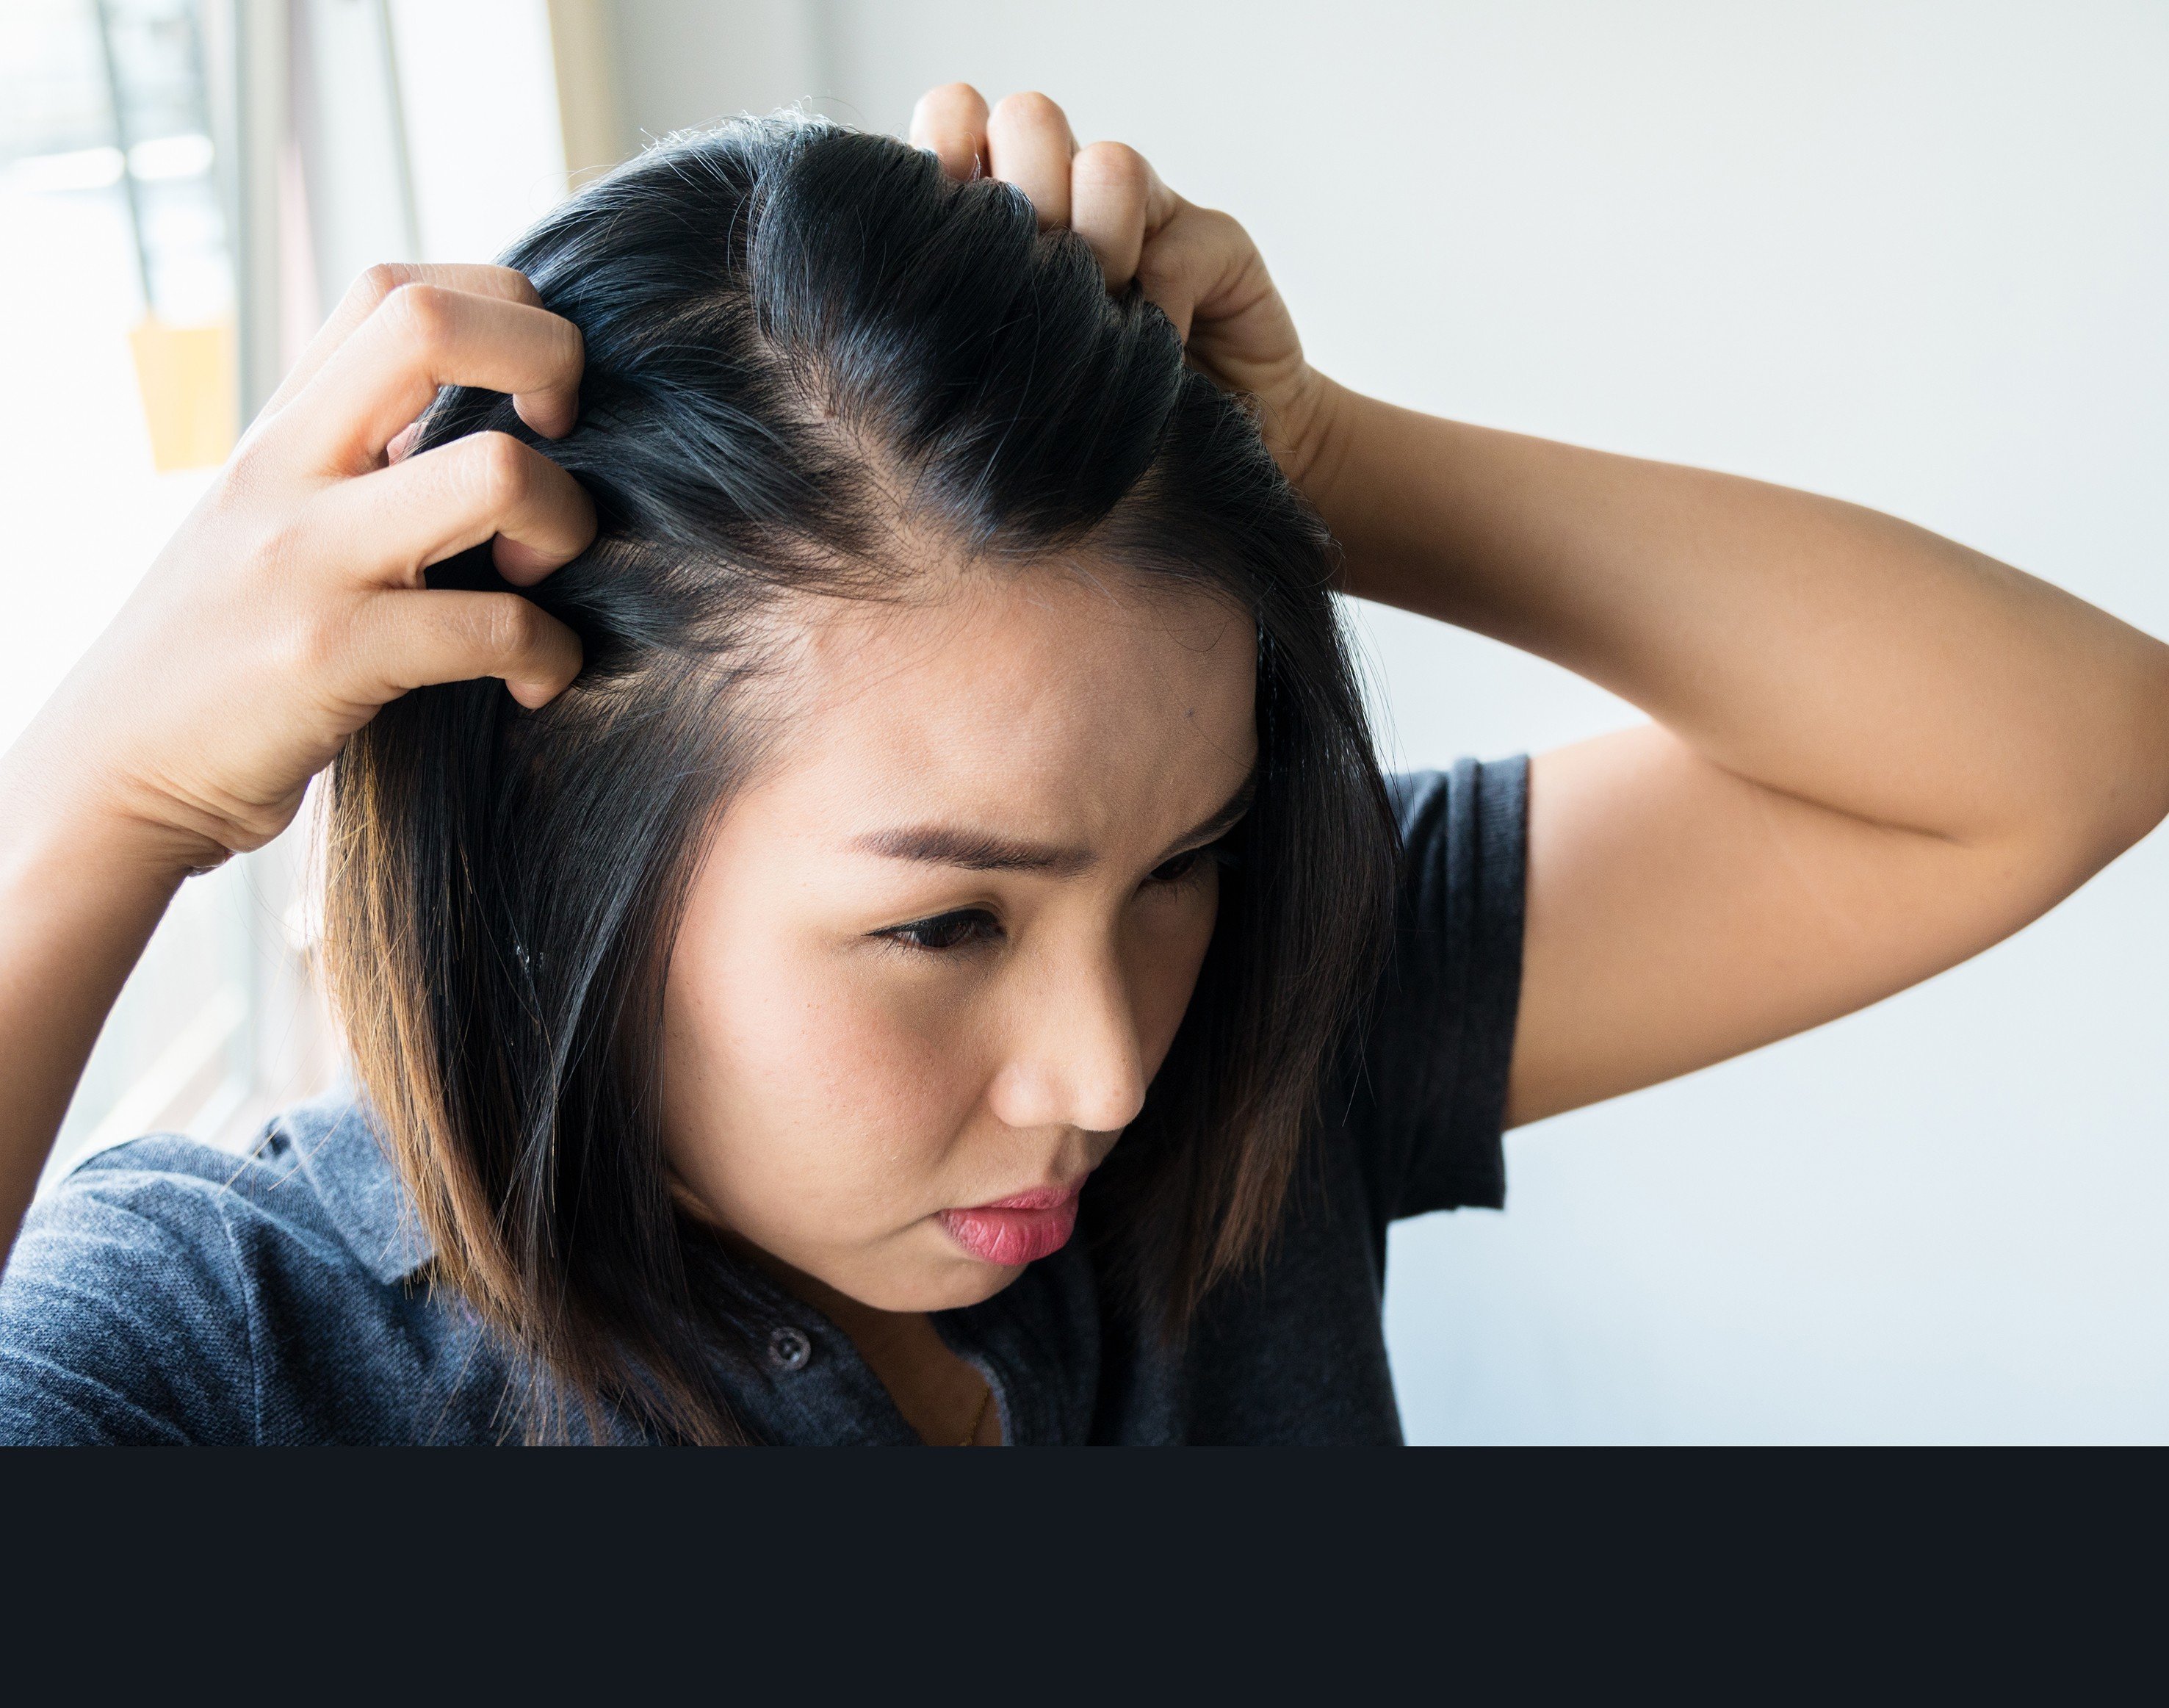 How stress and anxiety can cause hair loss issues